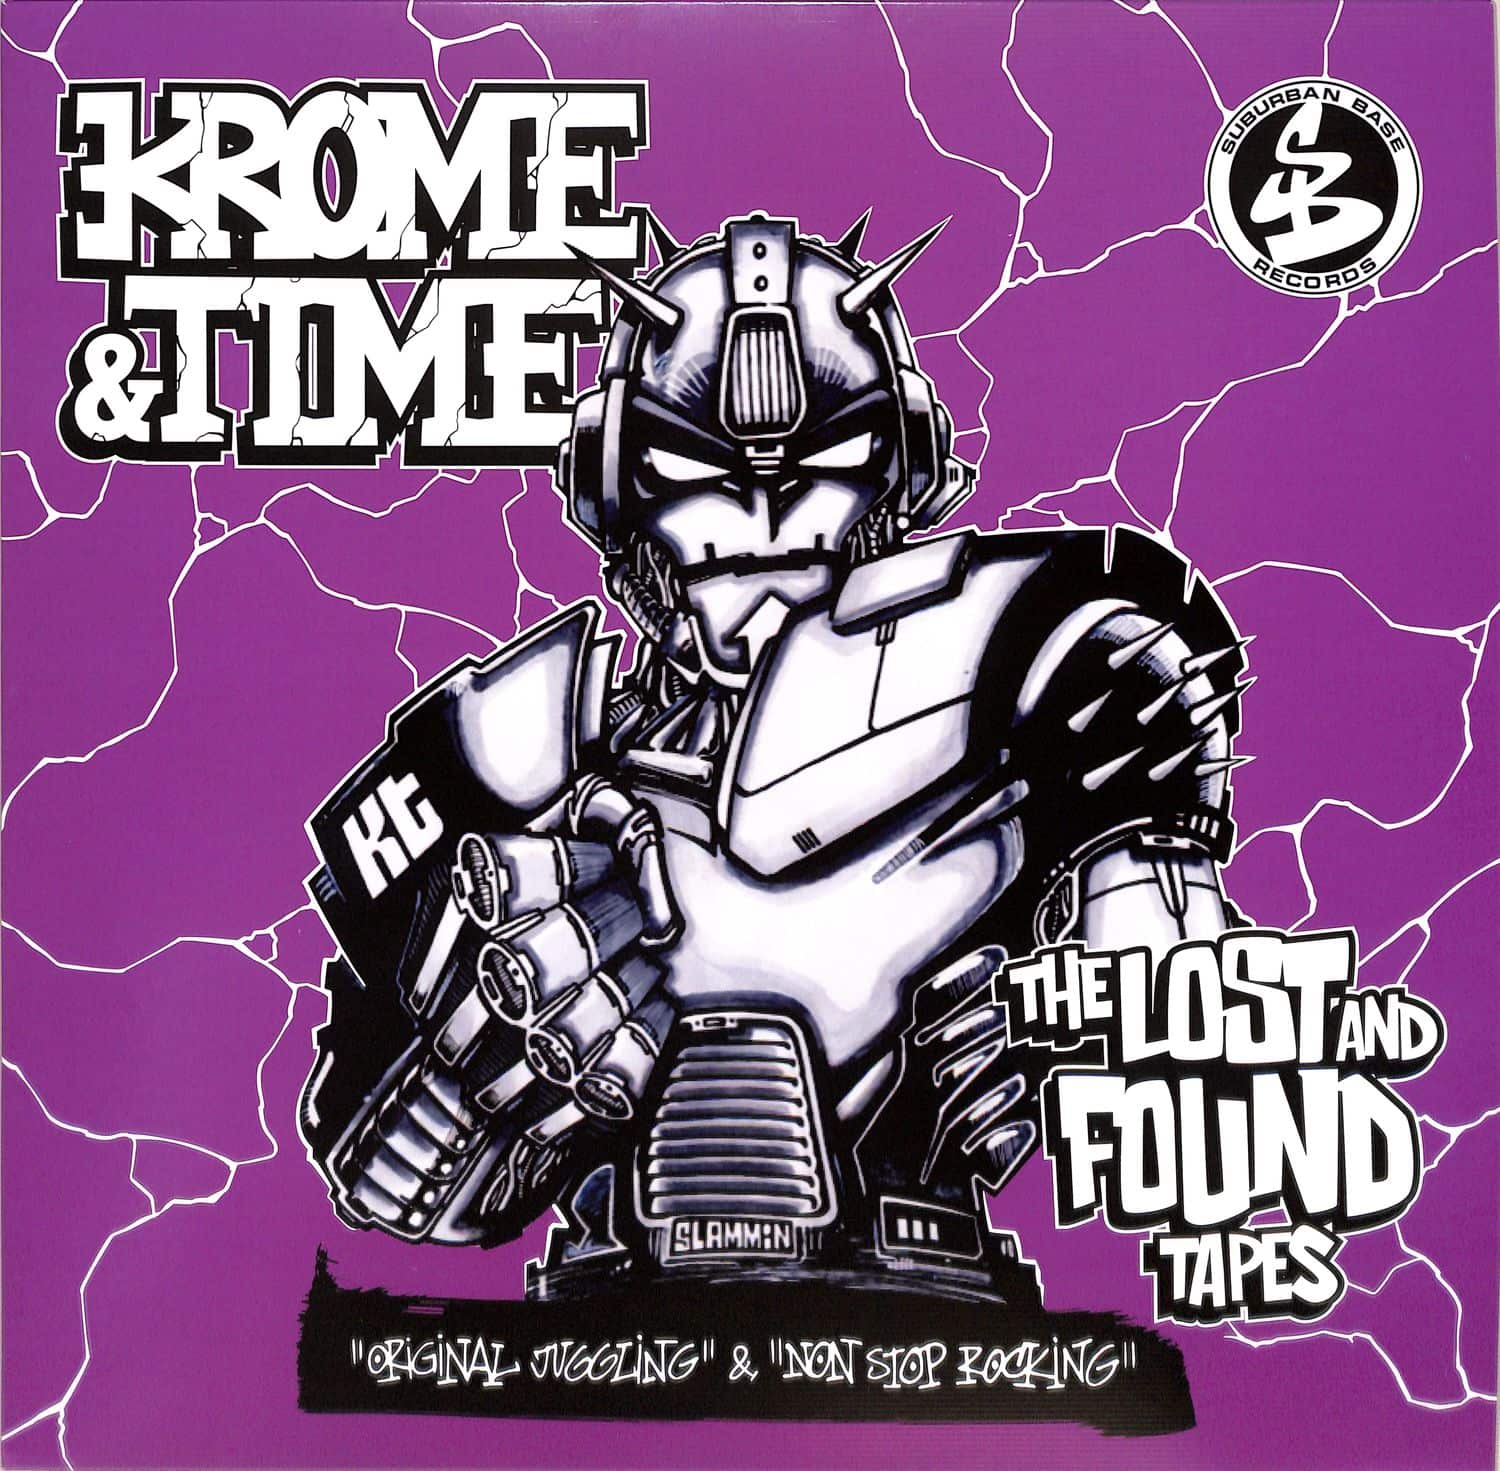 Krome & Time - LOST & FOUND TAPES 